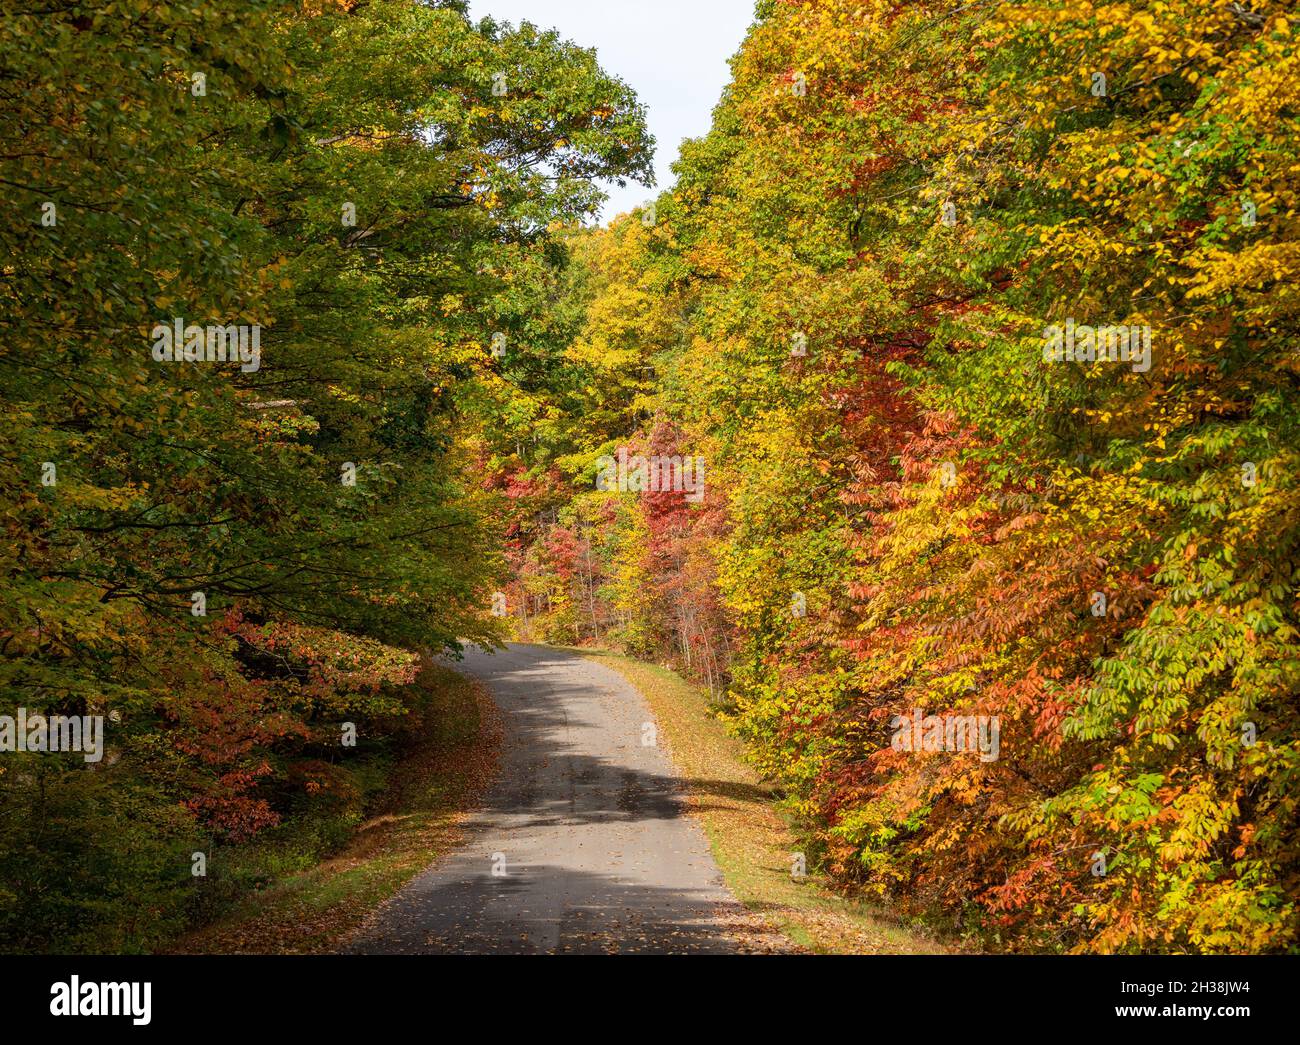 Paved road in the Coopers Rock state park in the autumn near Cheat Lake near Morgantown, WV Stock Photo